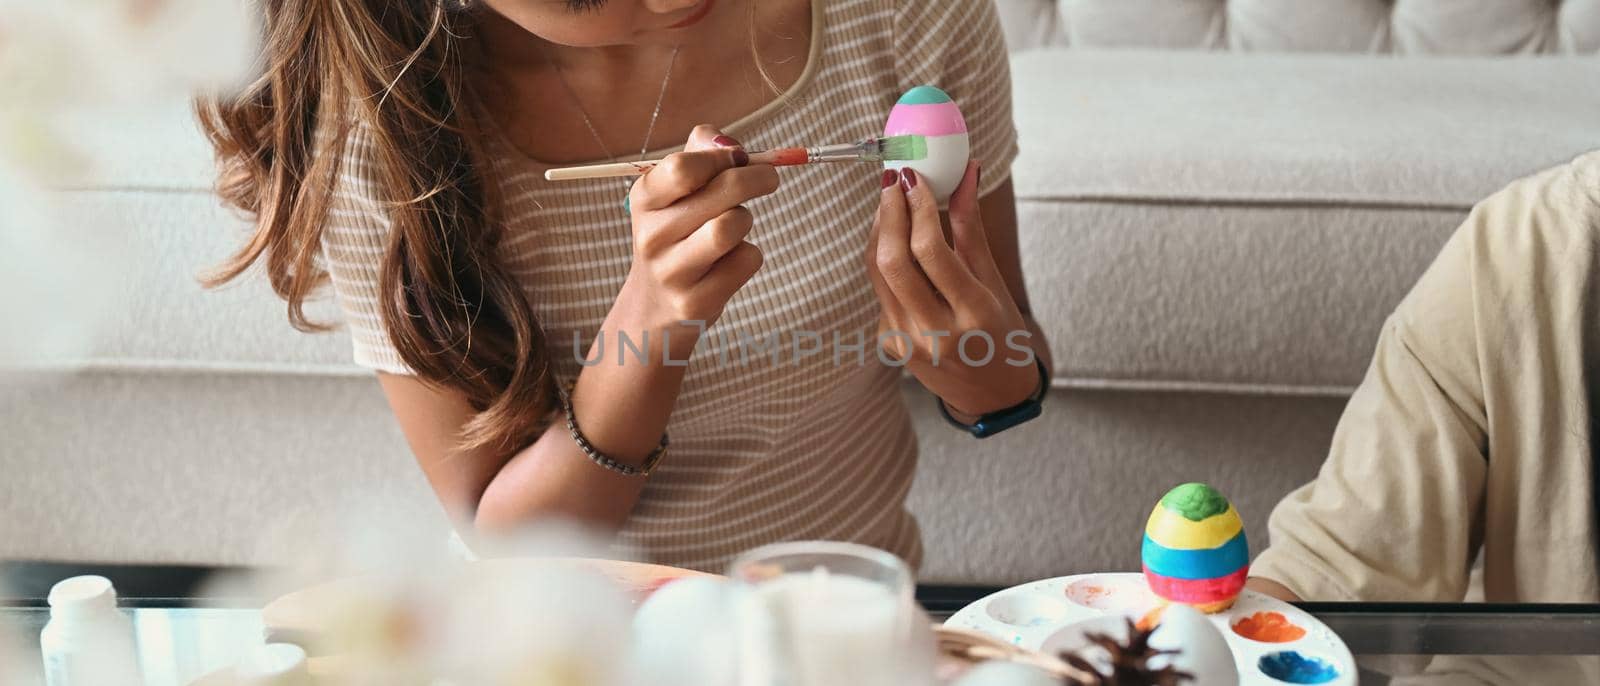 Young woman holding paintbrush and painting egg for Easter festivity. by prathanchorruangsak